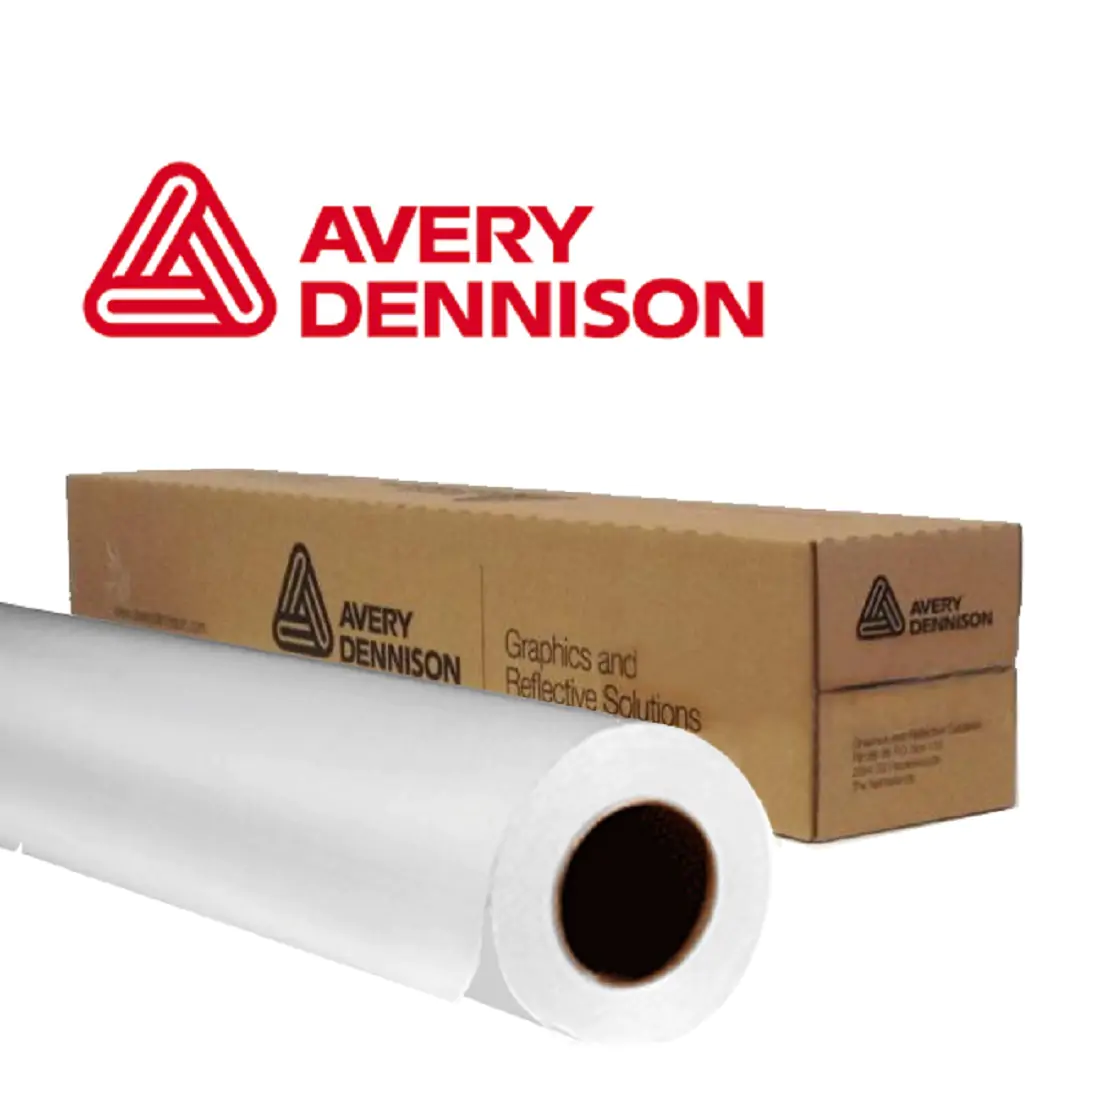 Avery Dennison in red, cardboard box and white DOL 3060 Gloss Overlaminate in the front